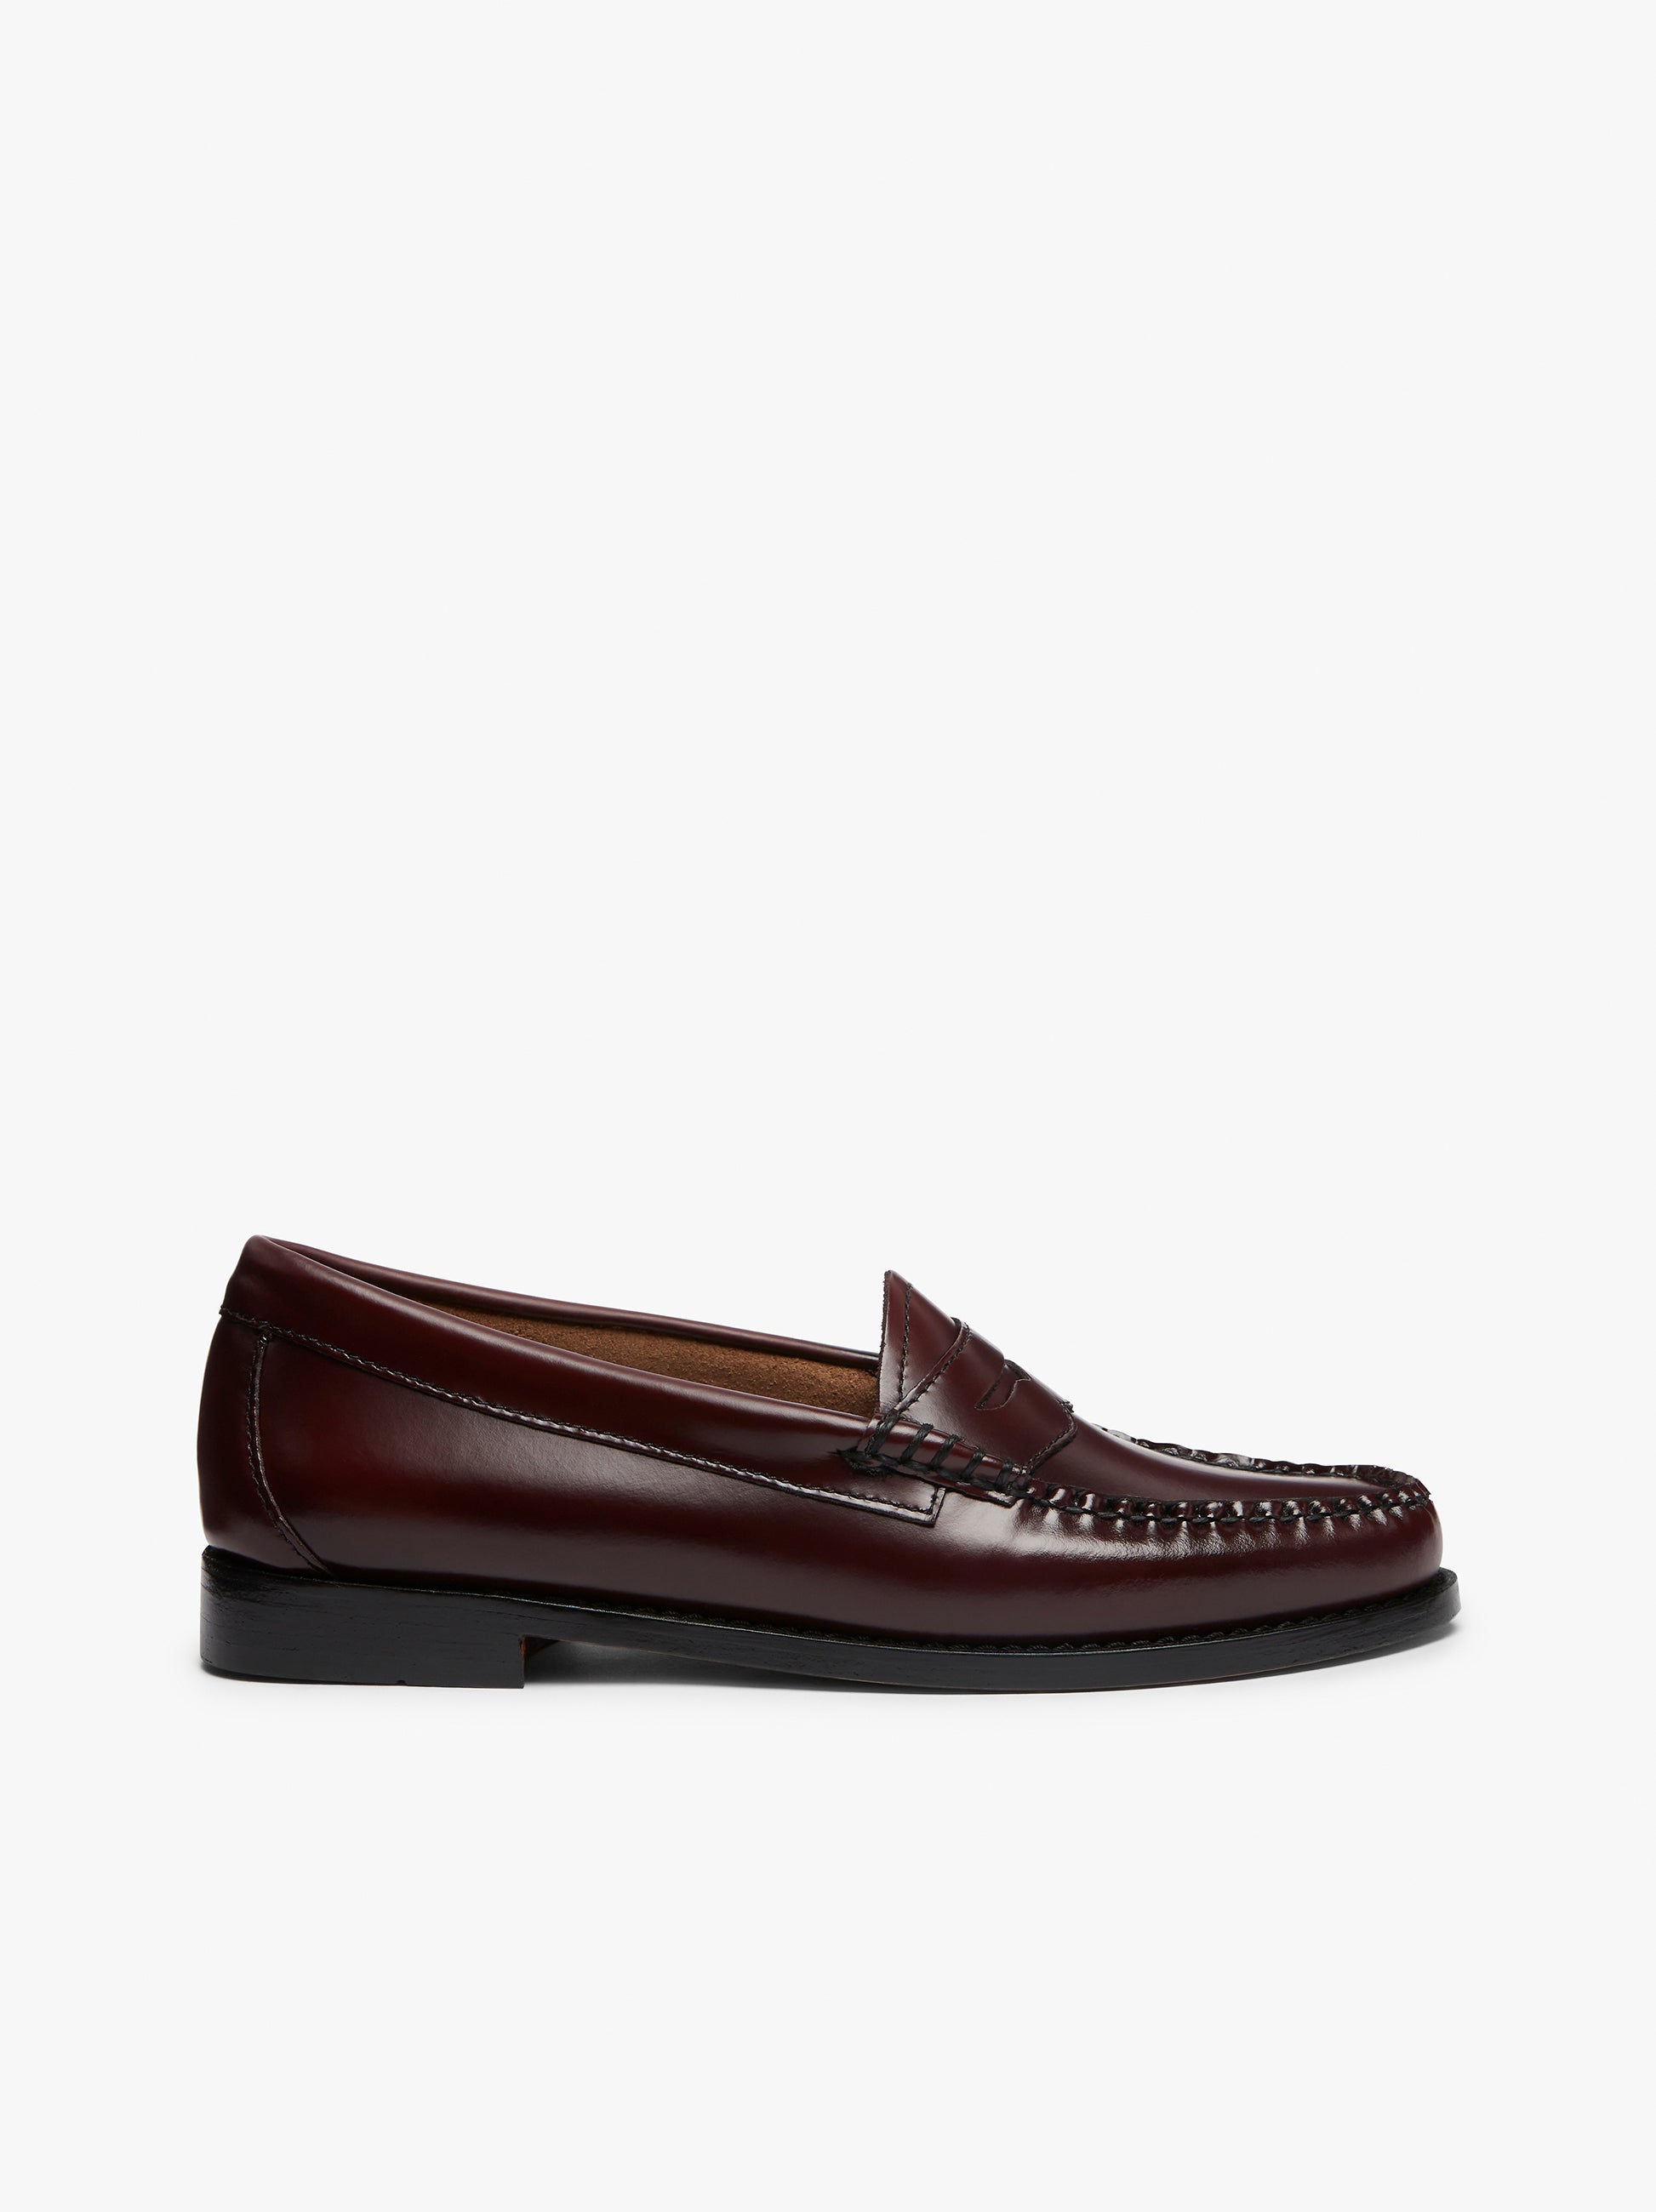 Bass Weejuns Burgundy | Burgundy Leather Loafers – G.H.BASS